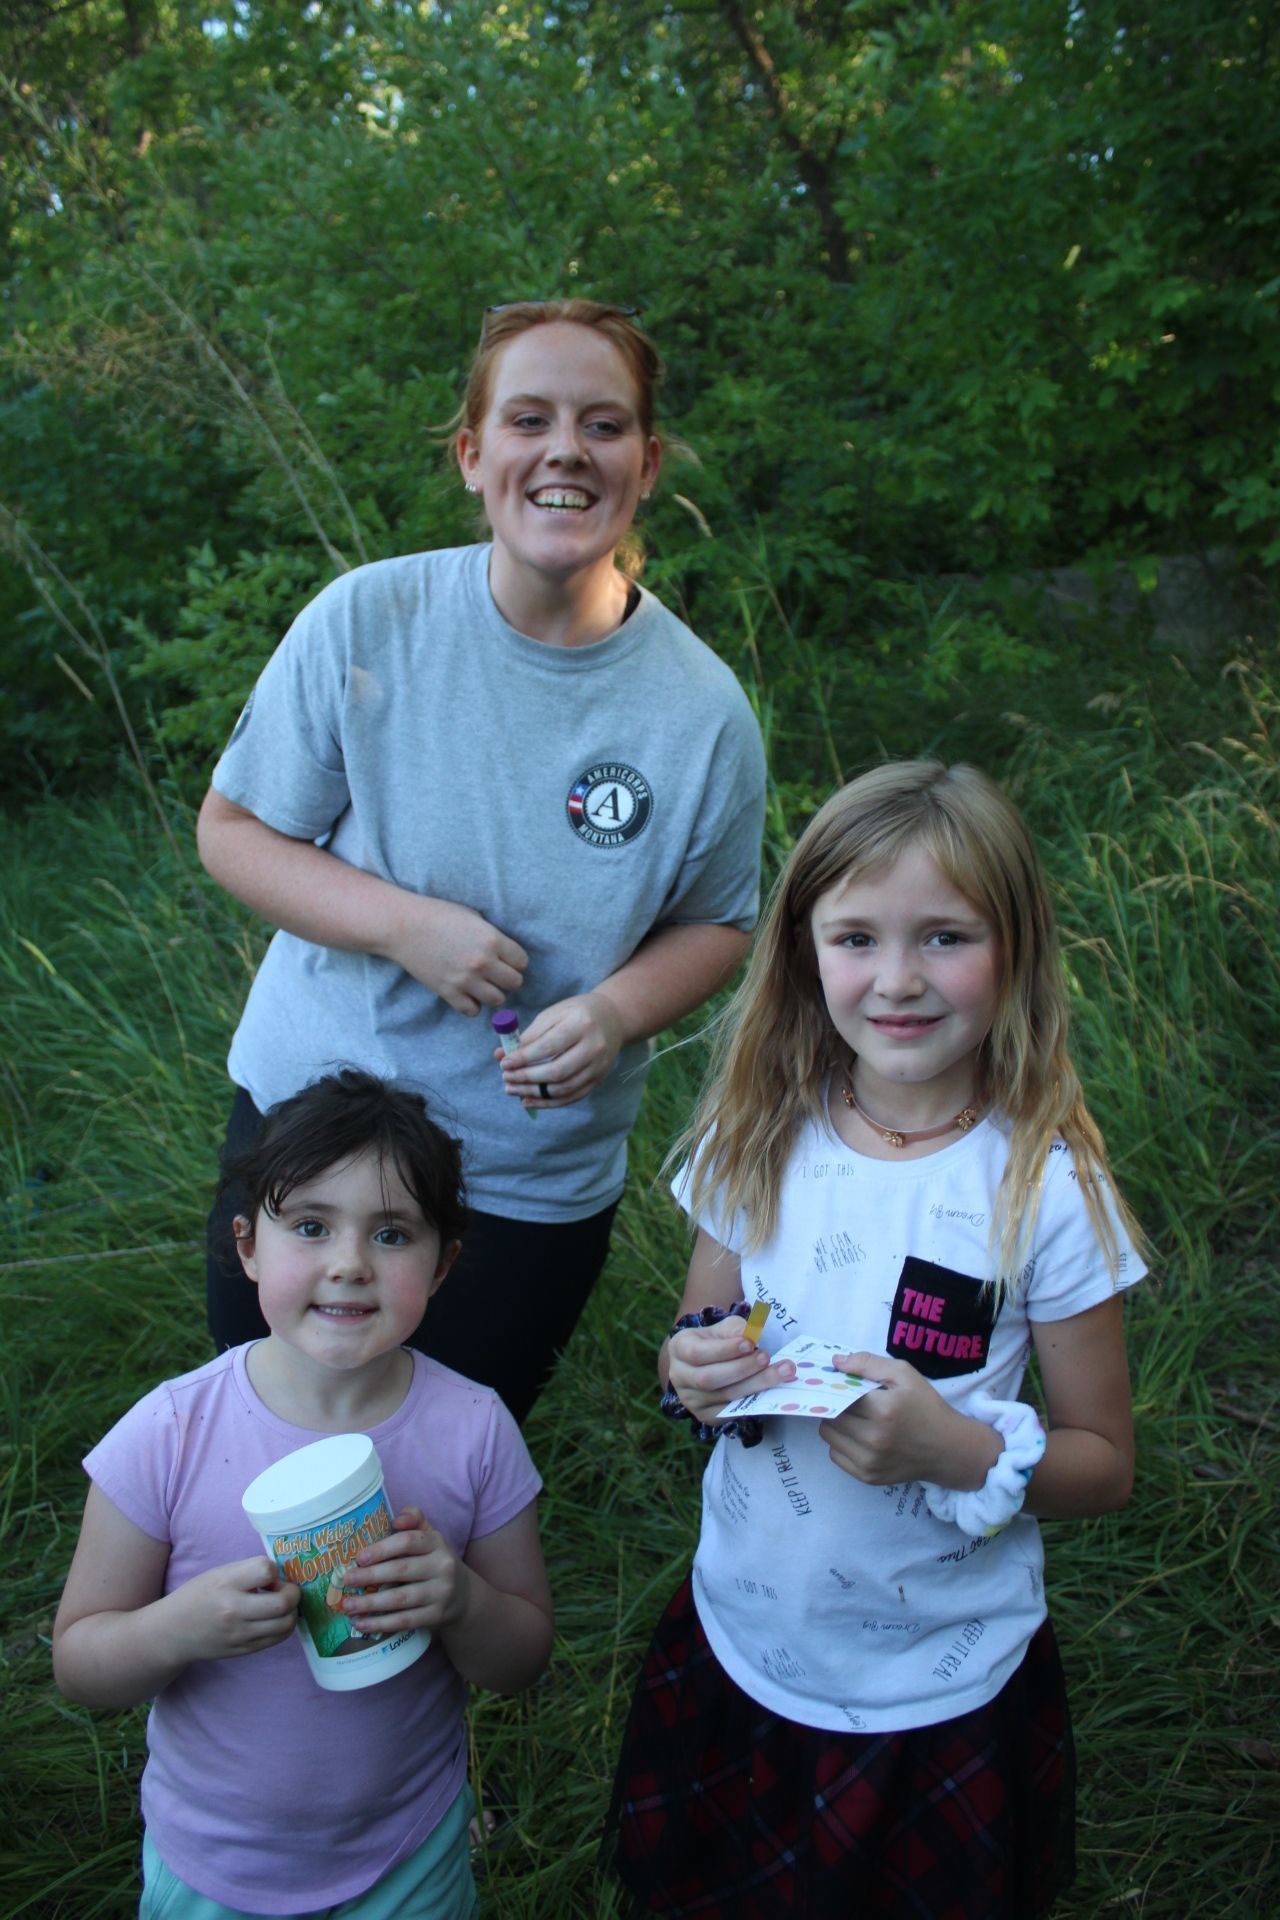 Maggie poses with two children at a water stewardship outreach event.